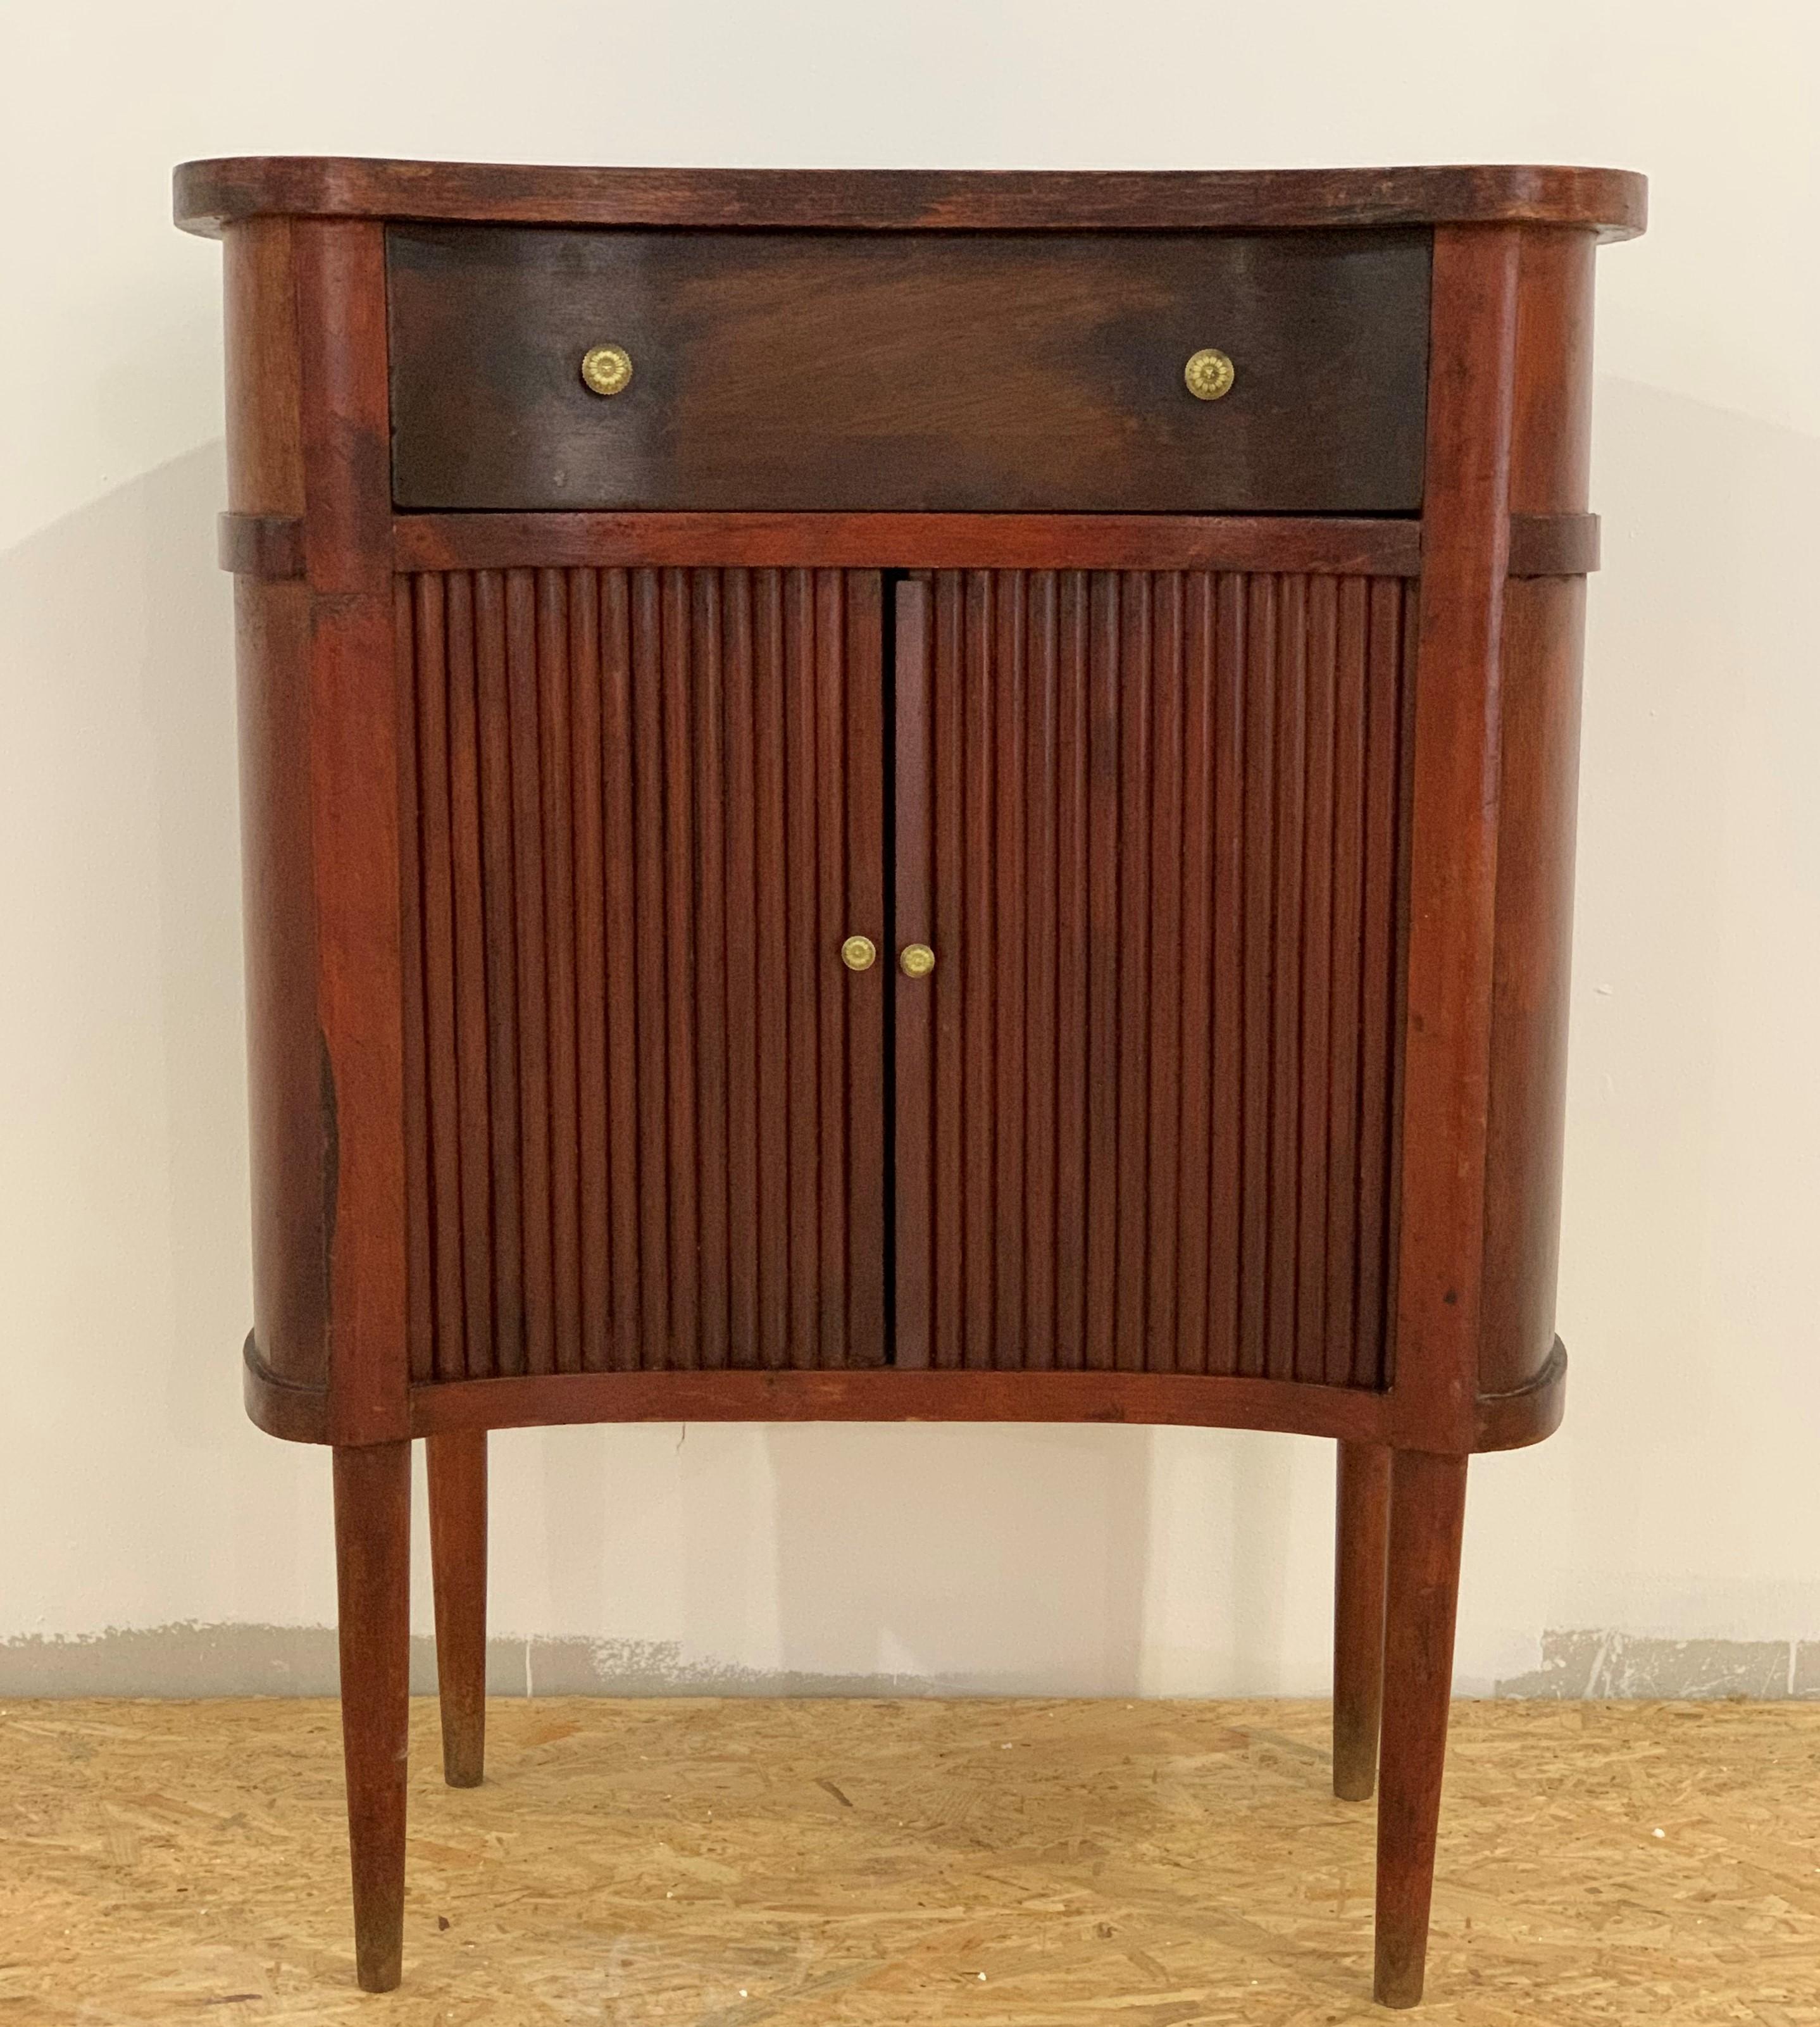 A French oak bedside tables with  reeded sliding-doors and drawer , from the late 19th century. This French 'table de chevet' features a kidney shape top sitting above two reeded sliding doors flanking one small size dovetailed drawers, all opening